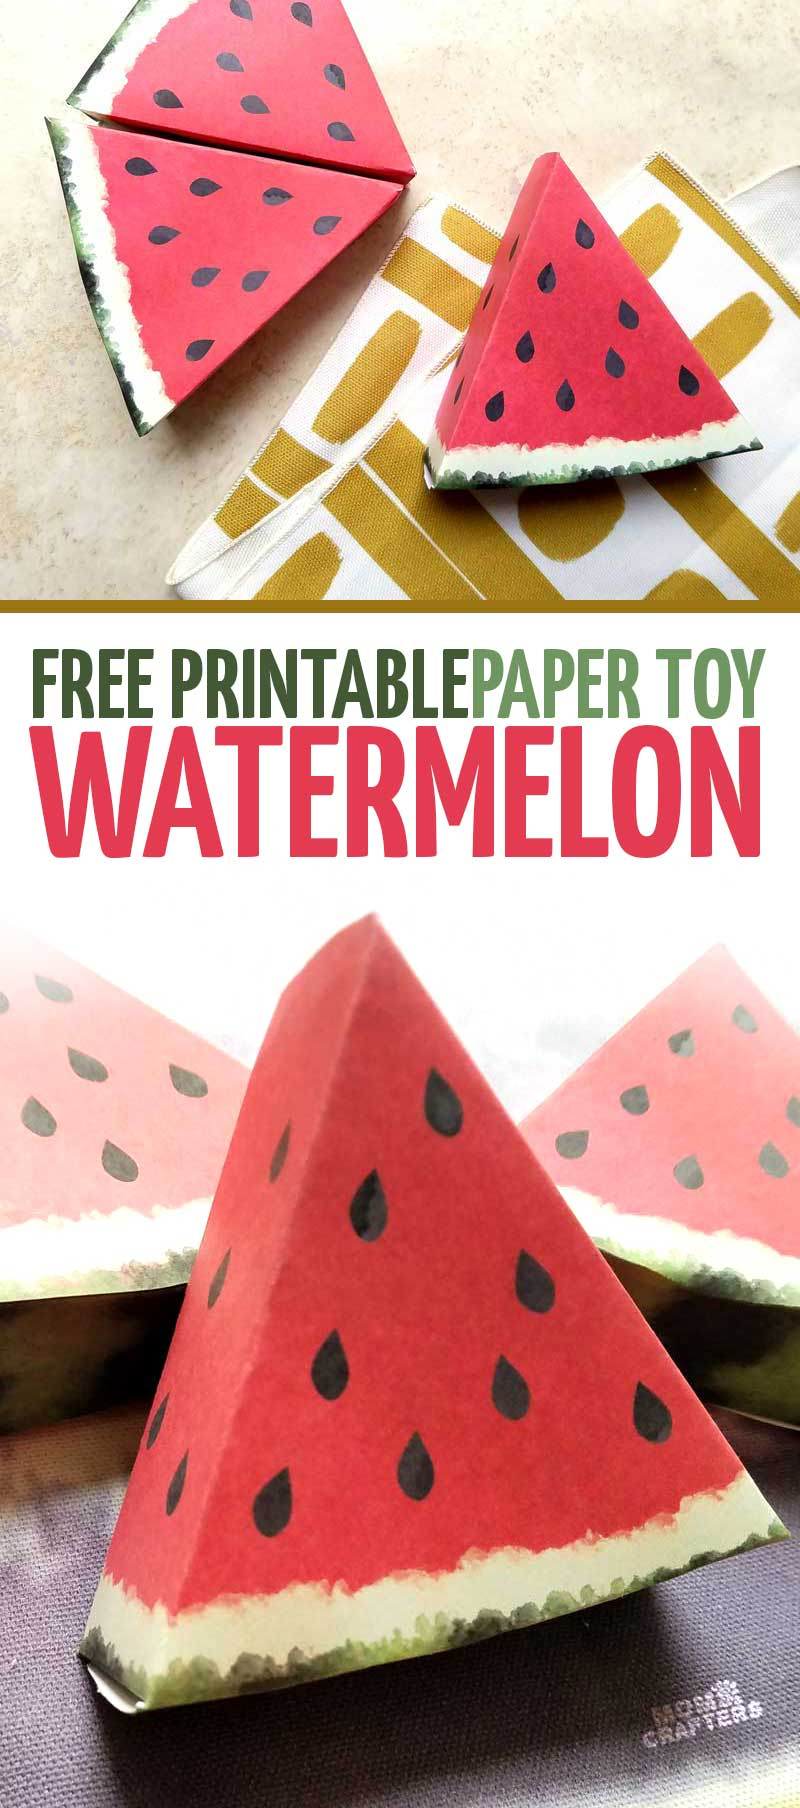 Paper Craft Templates For Play Fruit: Watermelon – Moms And Crafters - Printable Paper Crafts Free